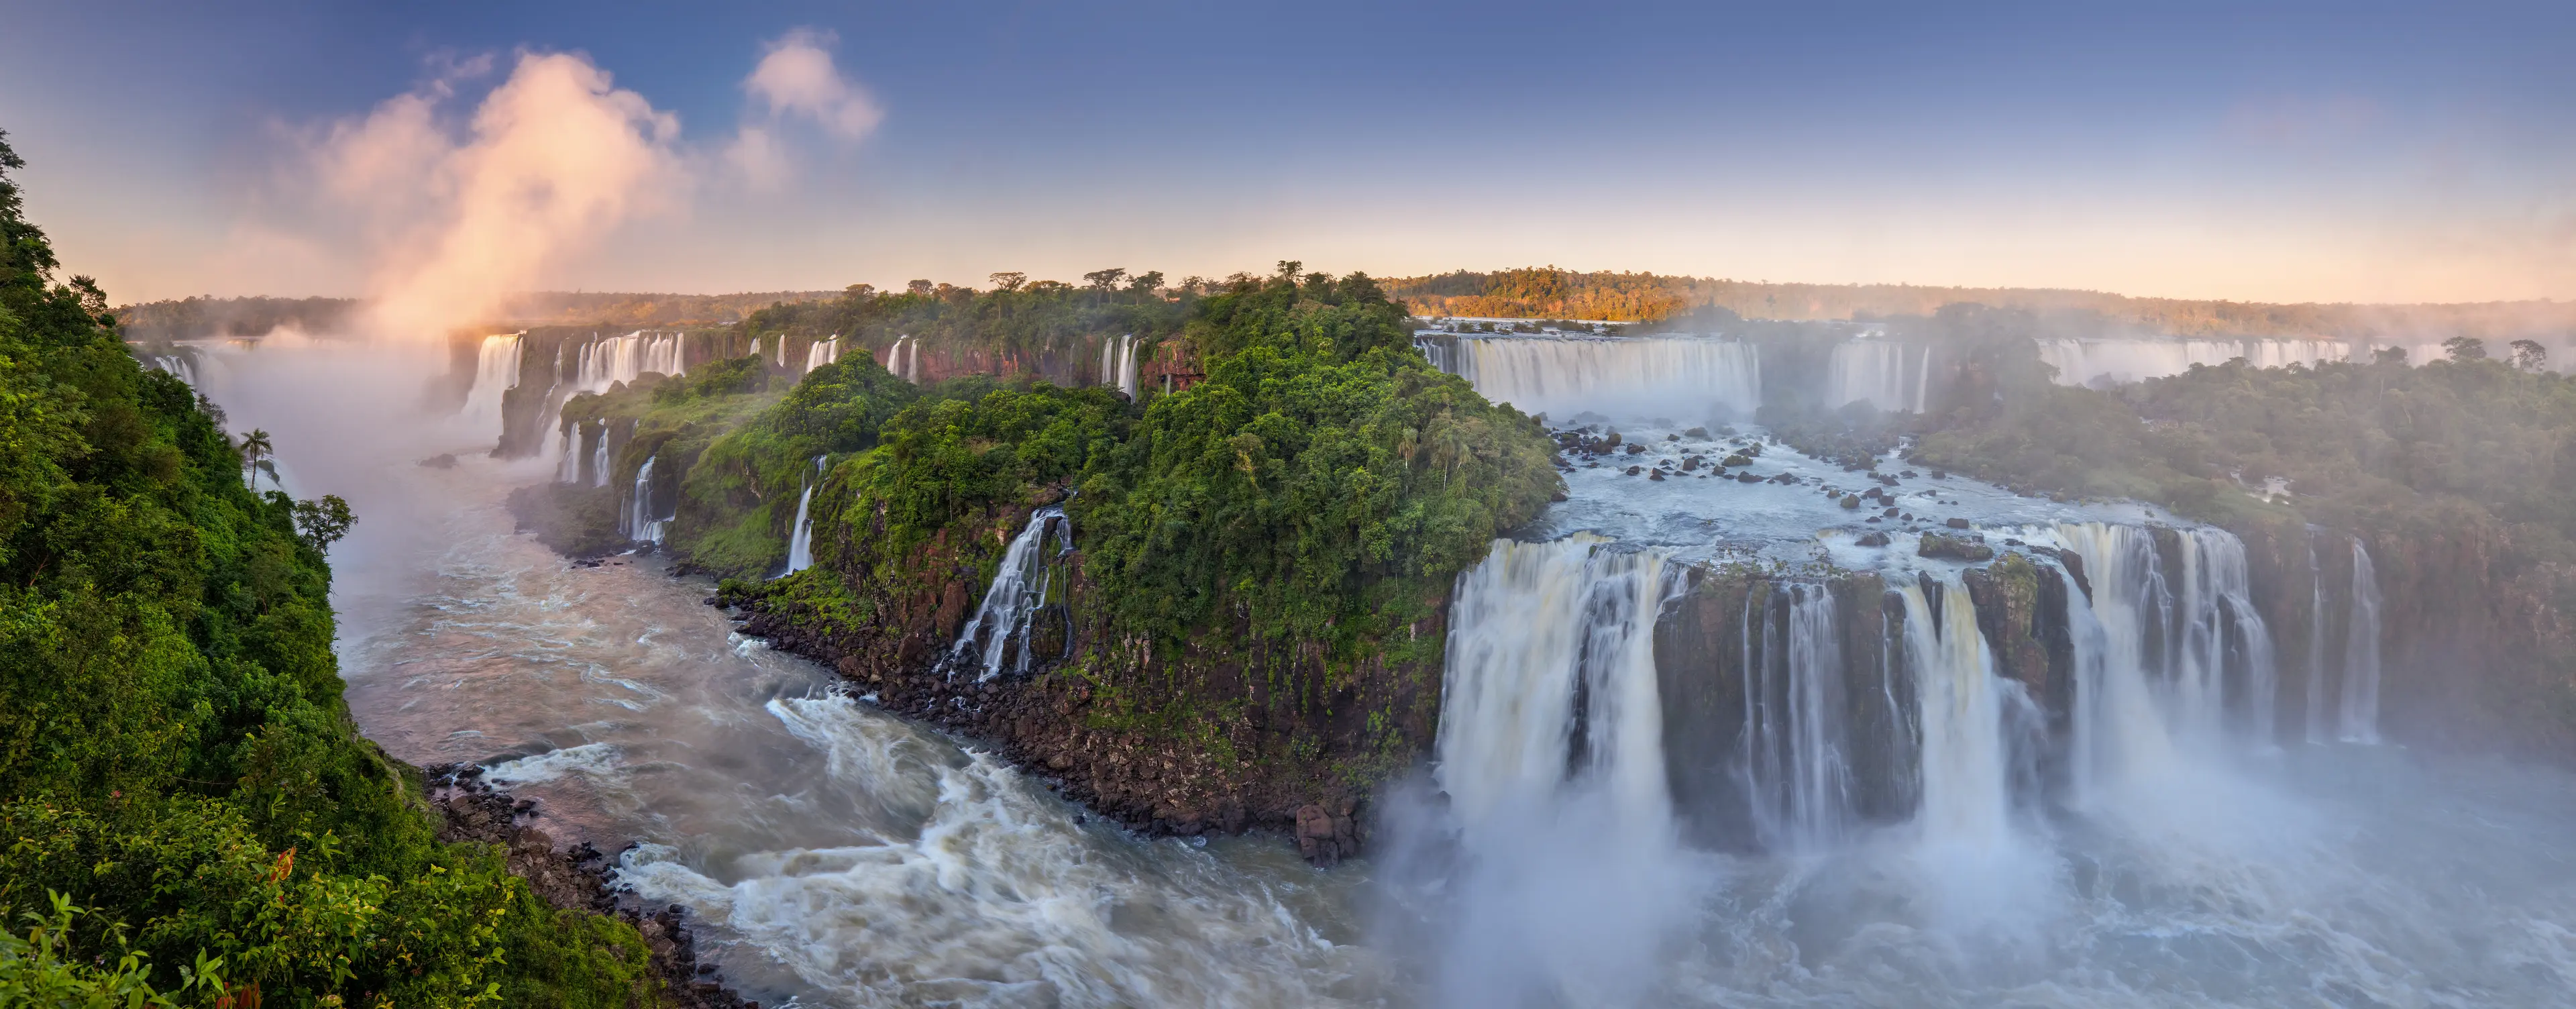 2-Day Offbeat Outdoor Adventure and Sightseeing at Iguazu Falls